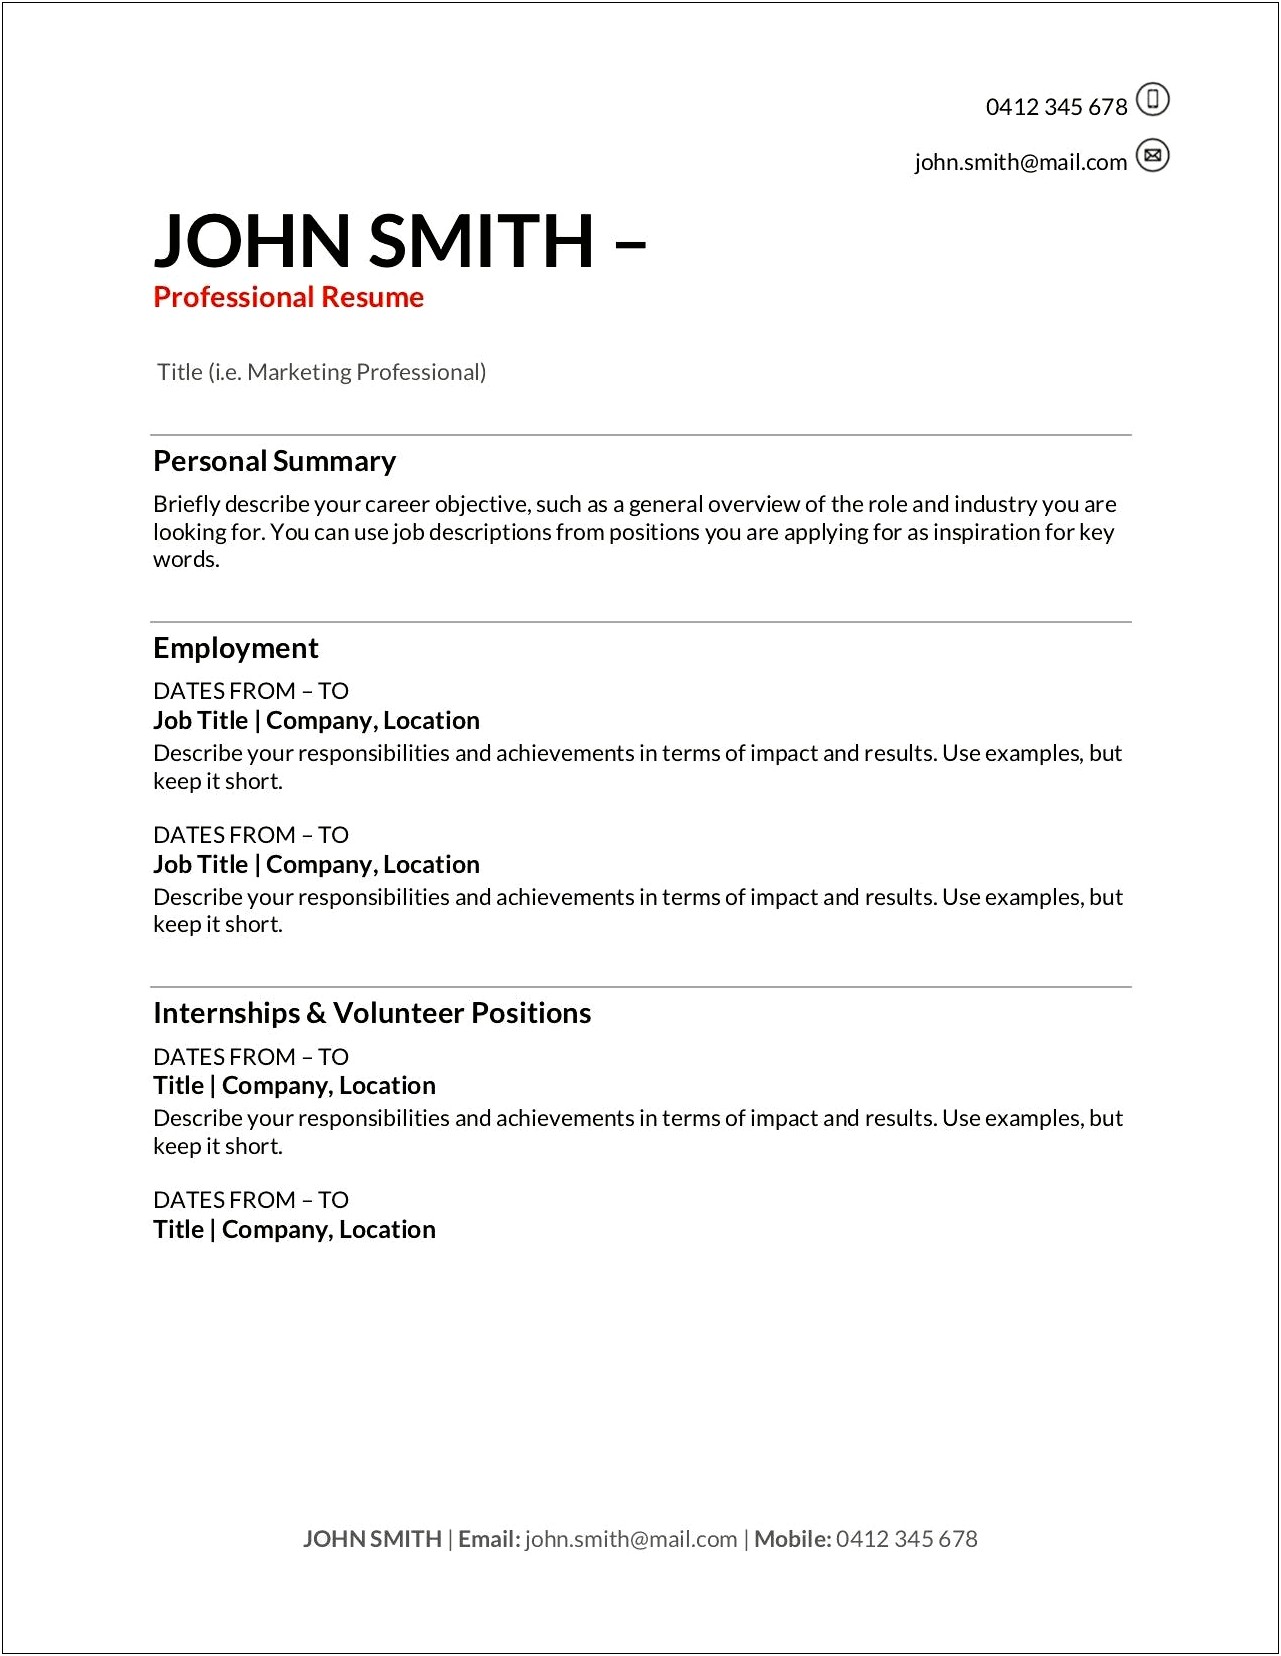 Objective For Child Investigator Employment Resume